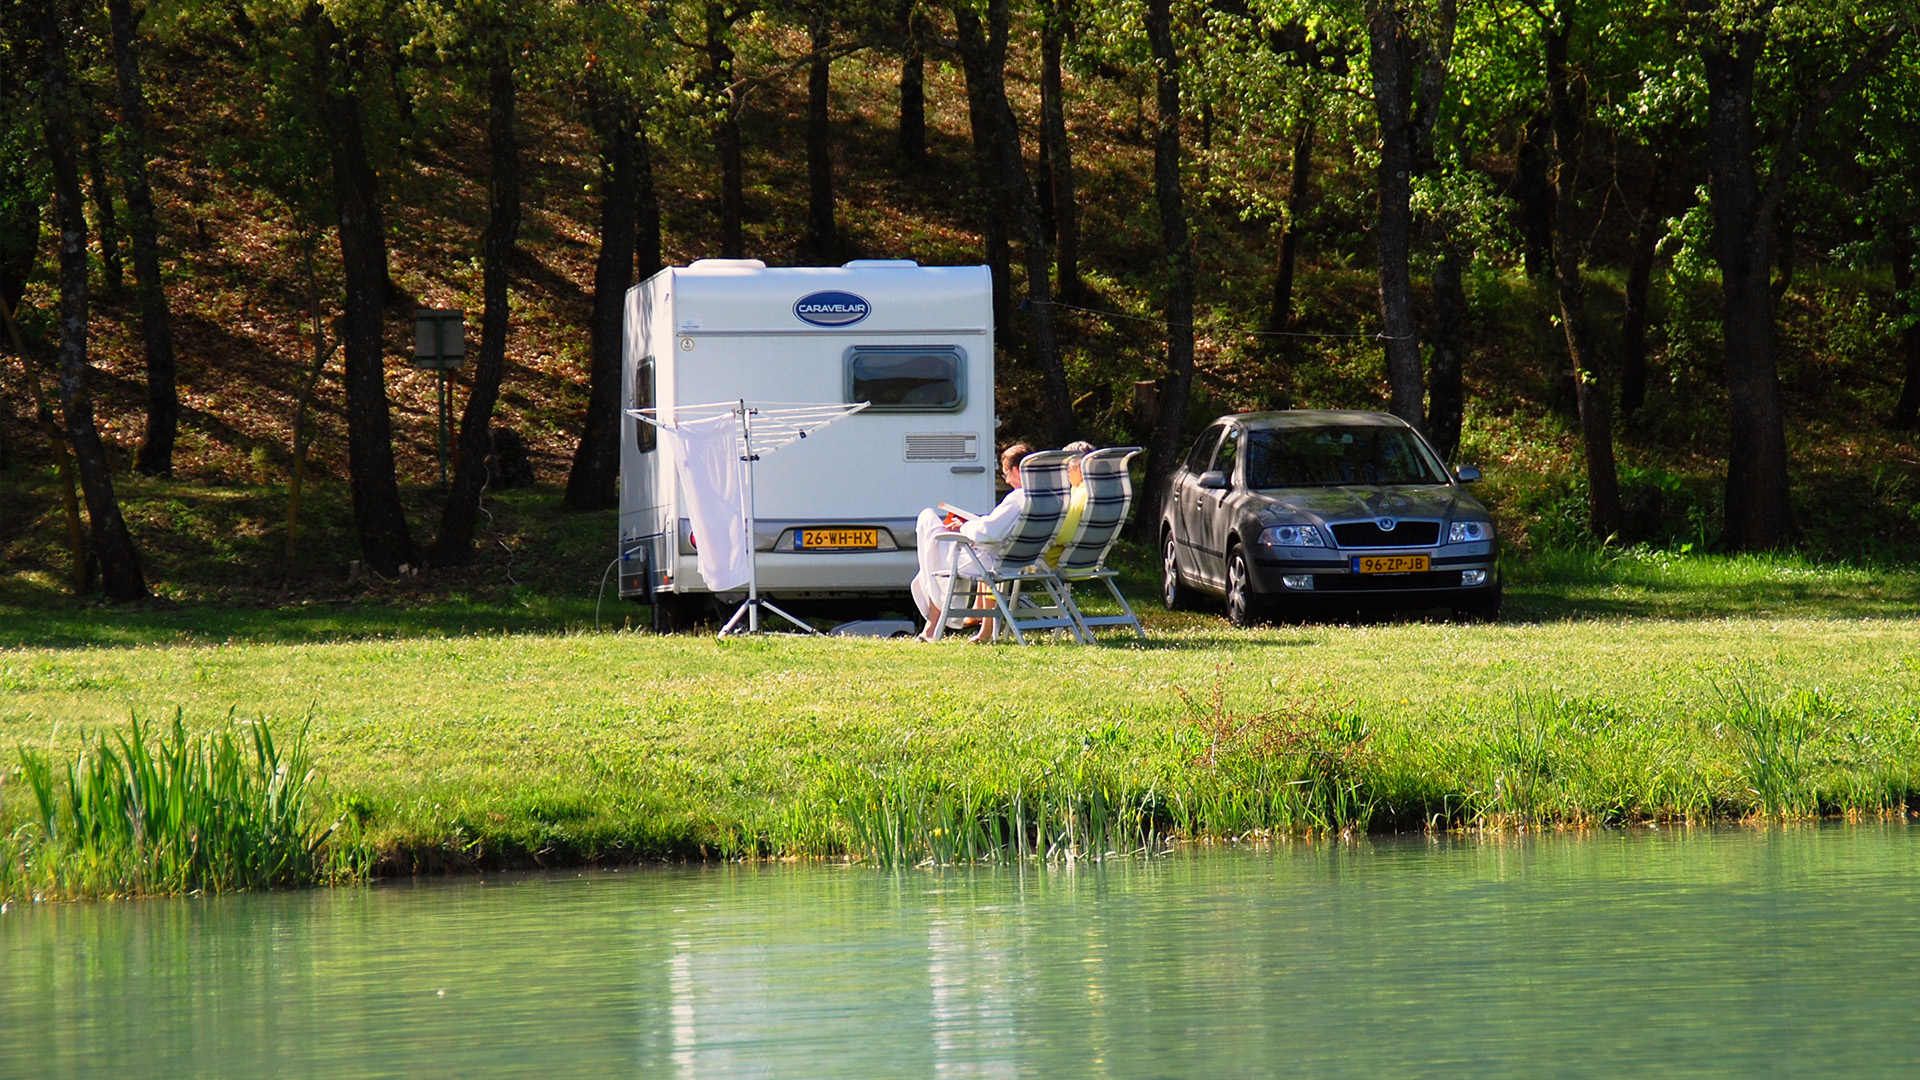 Lakeside camping pitch for tent, caravan or camping car